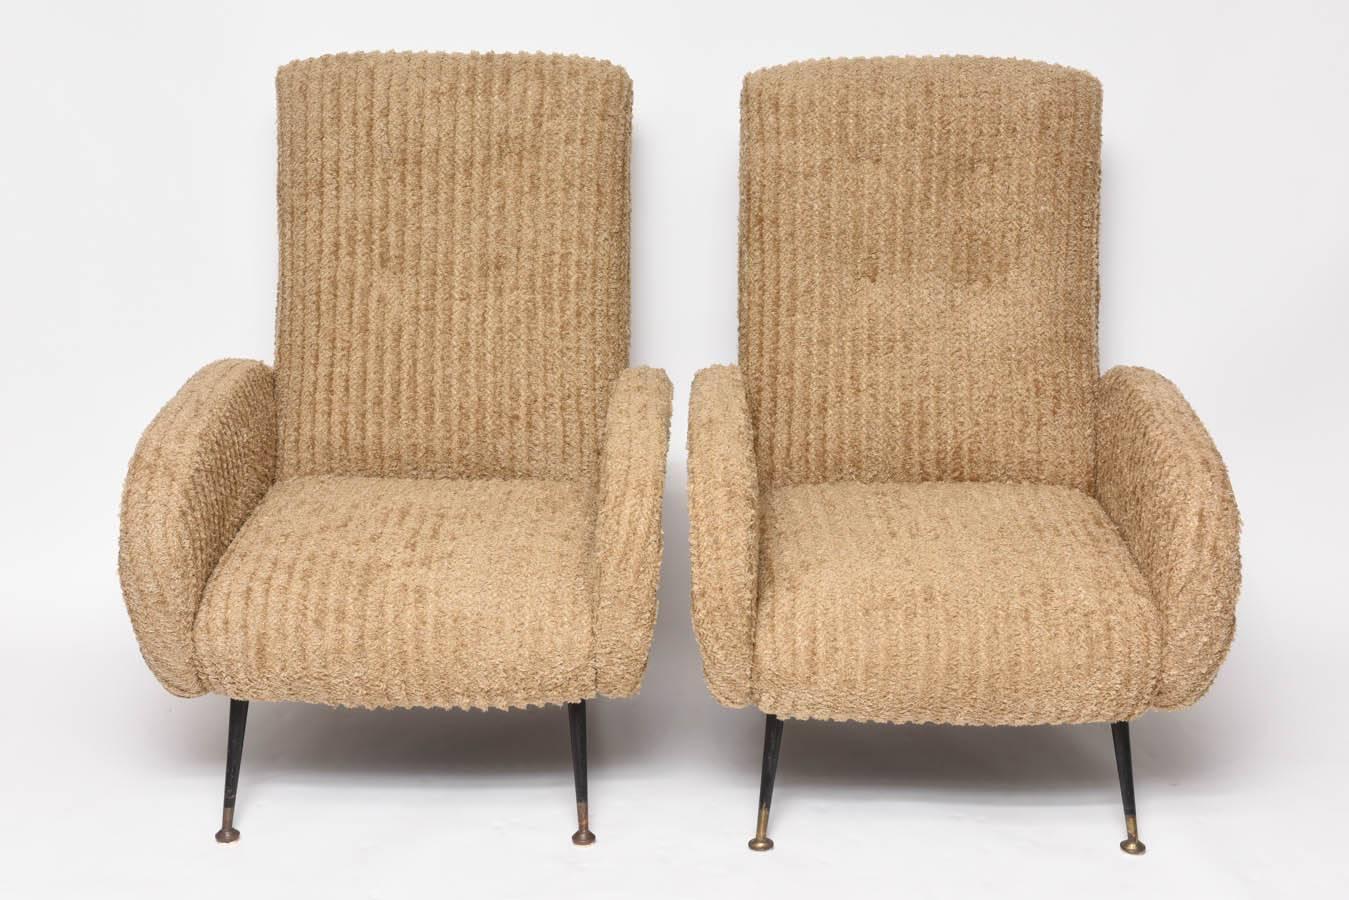 Pair of Italian Mid-Century lounge chairs in the manner of Marco Zanuso newly upholstered in Beacon Hill Caramel thick corduroy mohair.  These are original vintage chairs not new custom designs.

NOTE:  These items will ship from our MIAMI